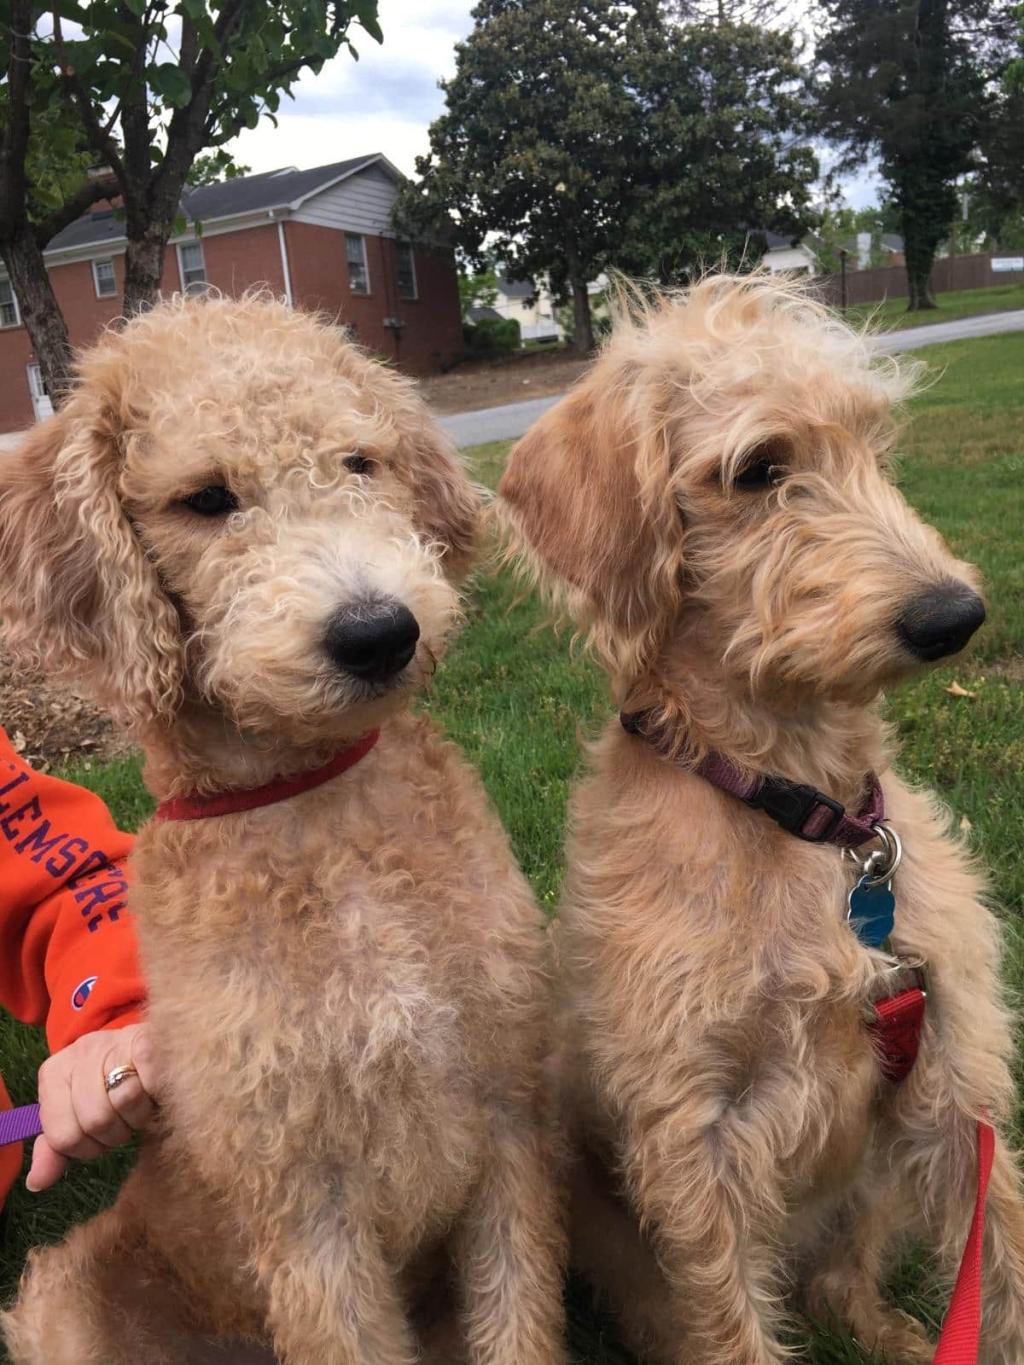 Maisy (Labradoodle mom) is on the right, with her sister, Buffy on the left